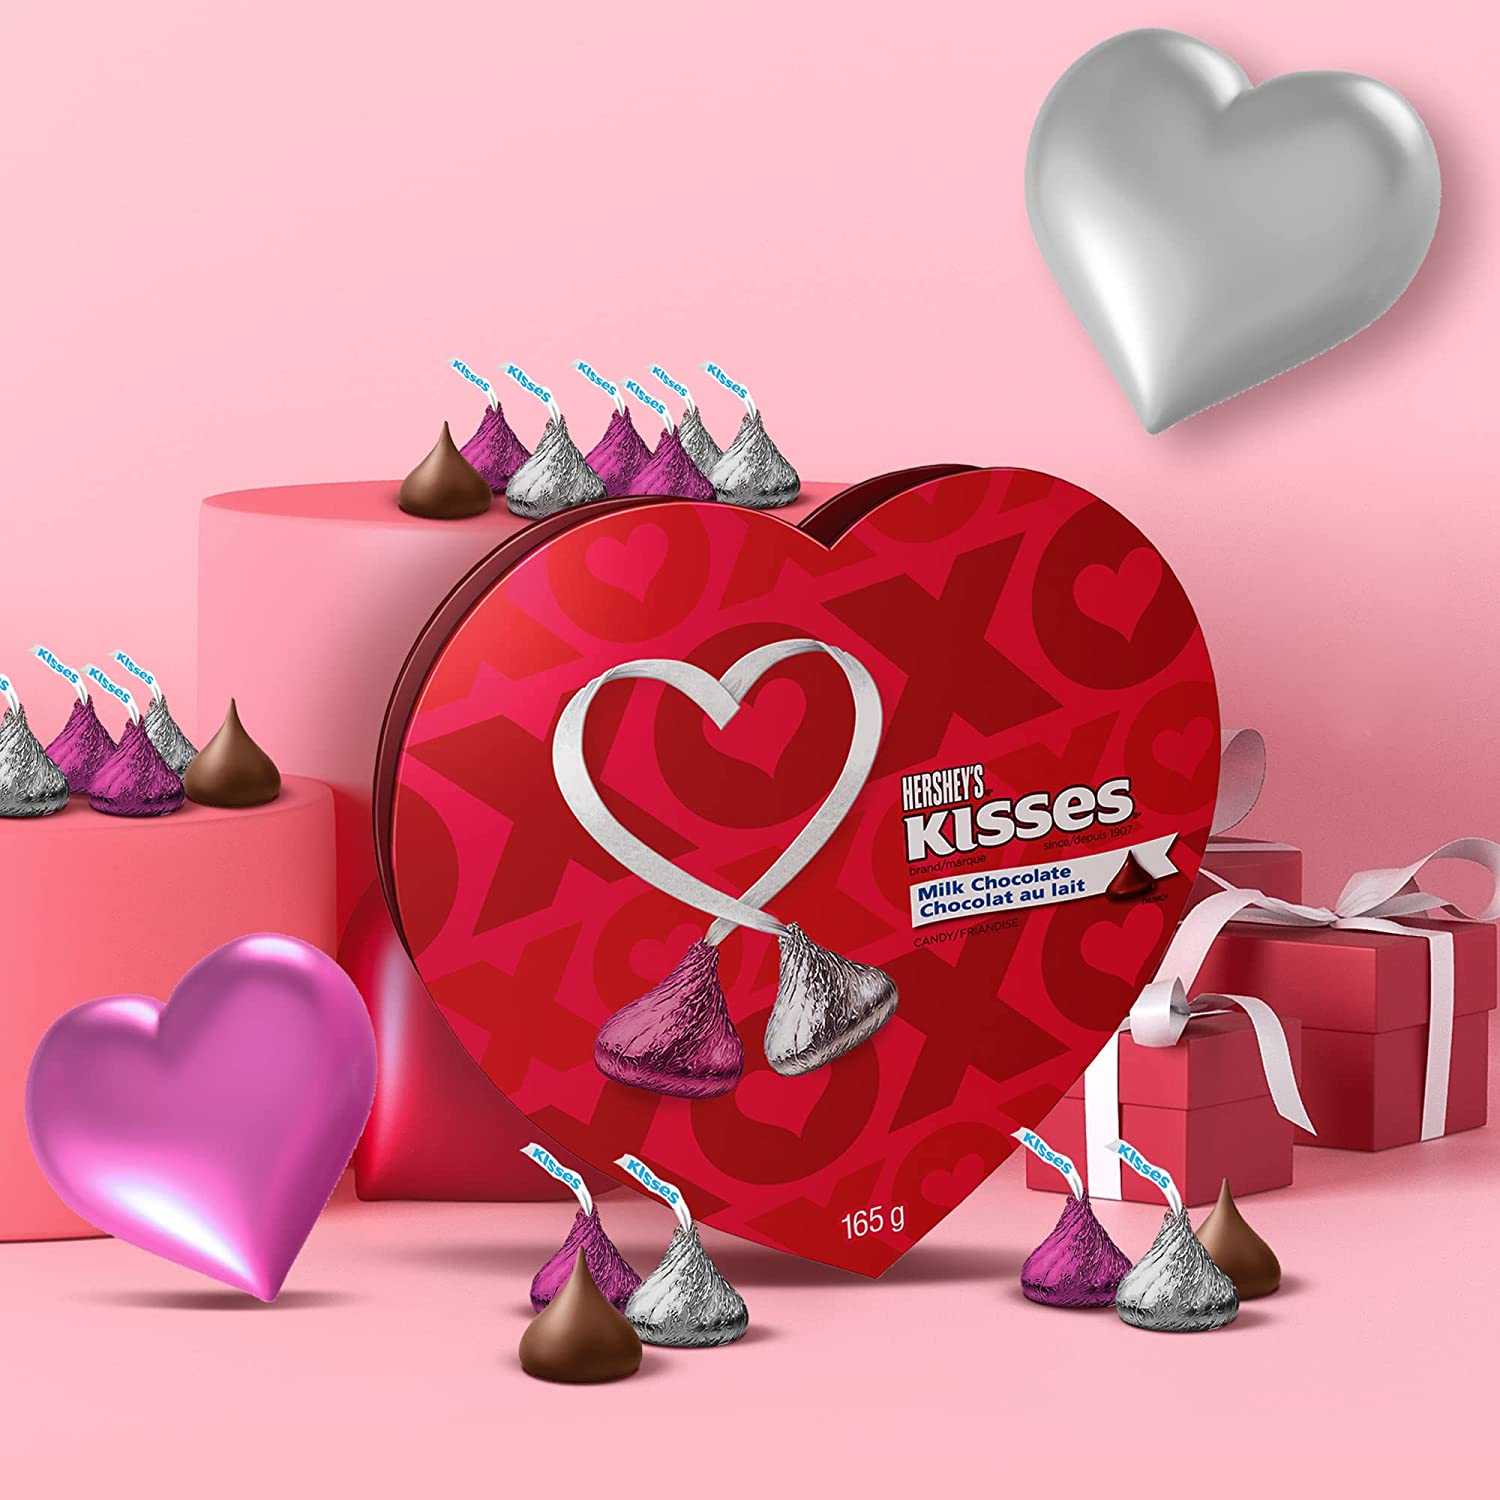 How the hershey’s kiss conquered valentine’s day?